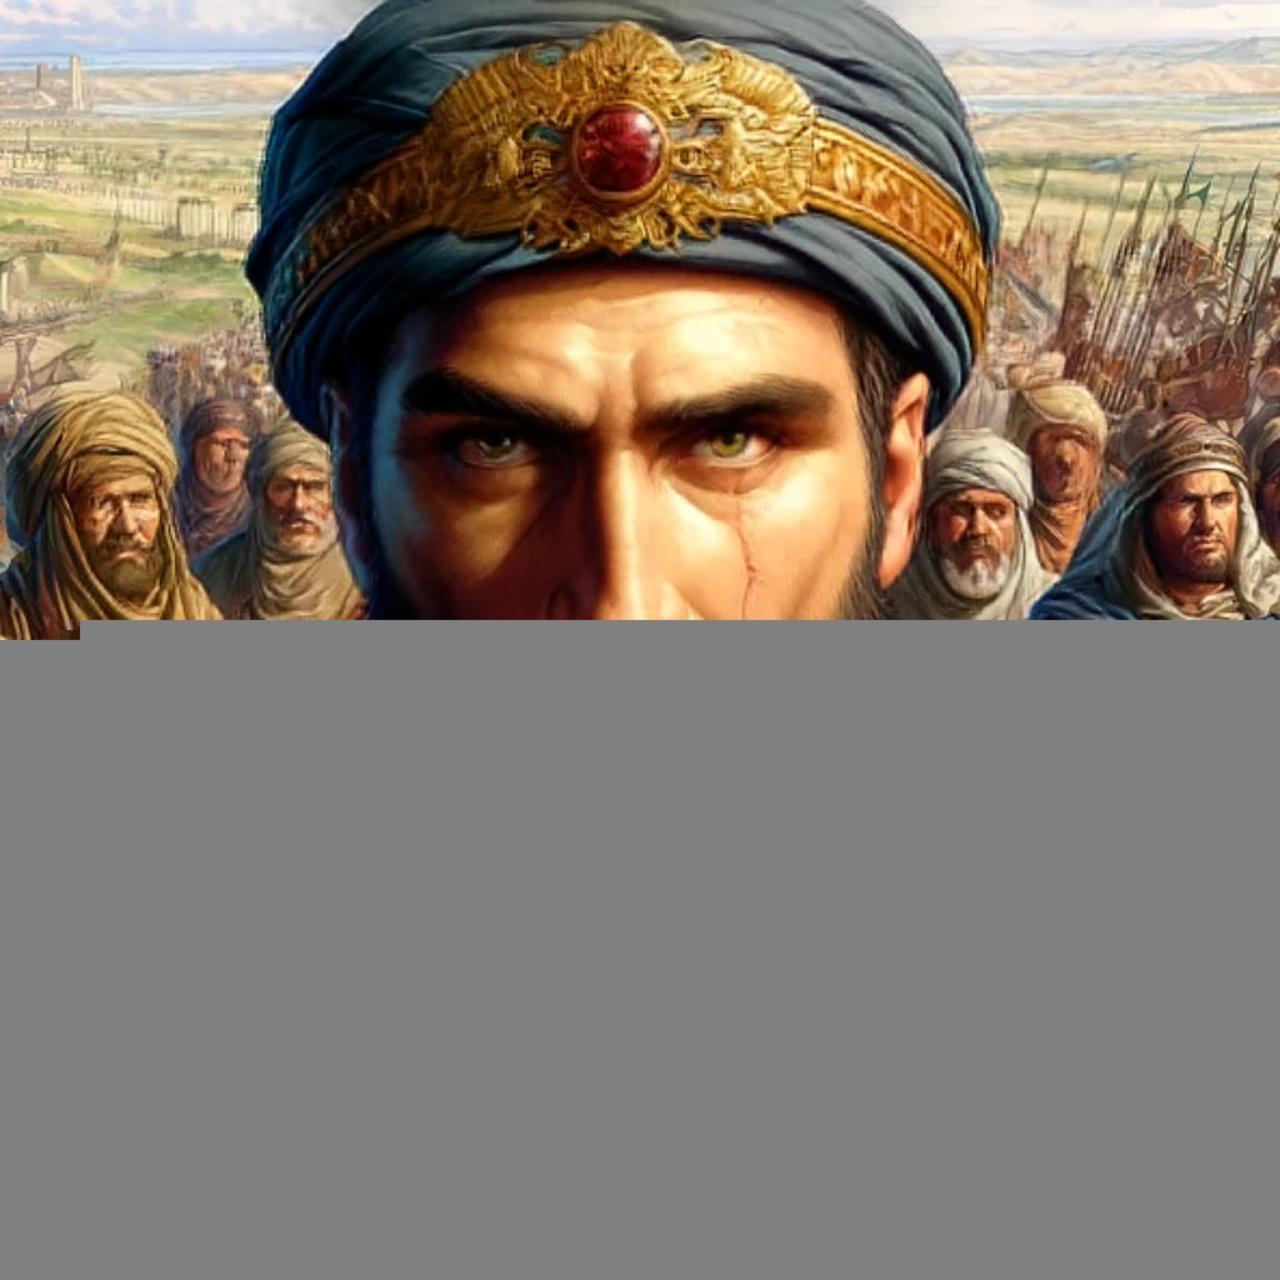 Saladin Tells His Story as Sultan of Egypt and How He Conquered Jerusalem